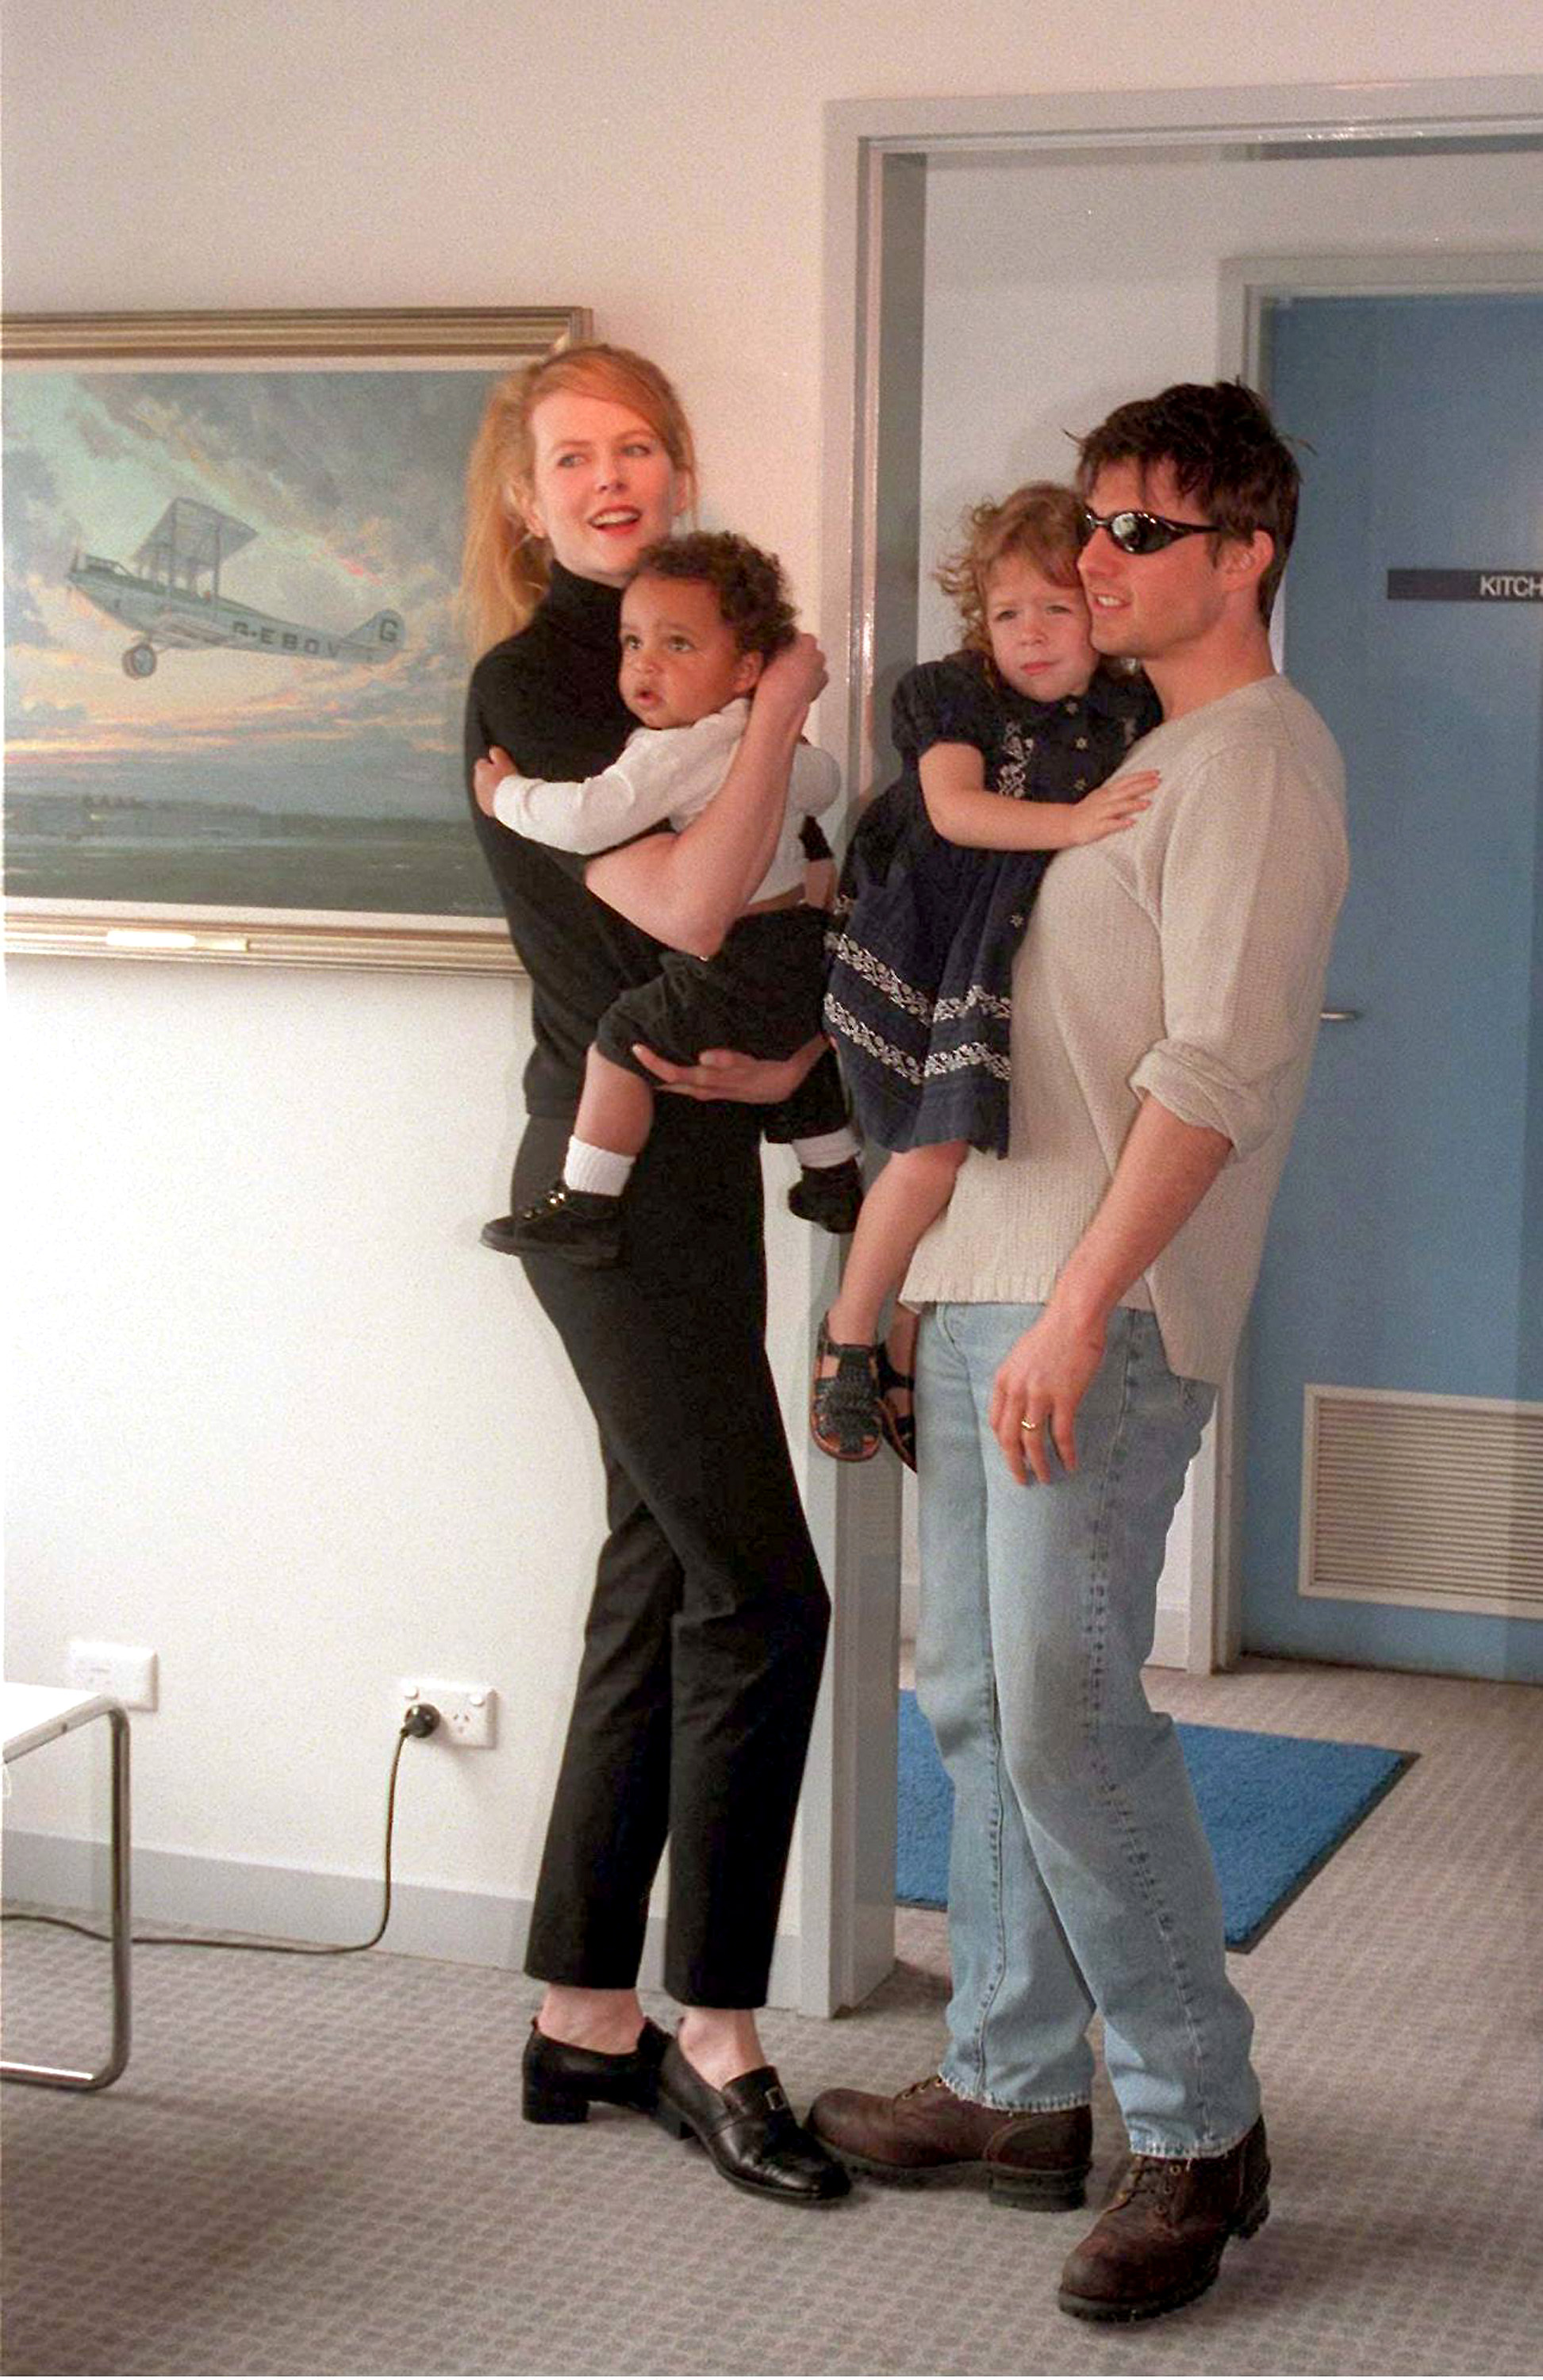 Nicole Kidman and husband Tom Cruise arrive at Sydney Kingsford Smith airport and introduce their children Connor and Isabella to the media January 24, 1996 in Sydney, Australia | Source: Getty Images